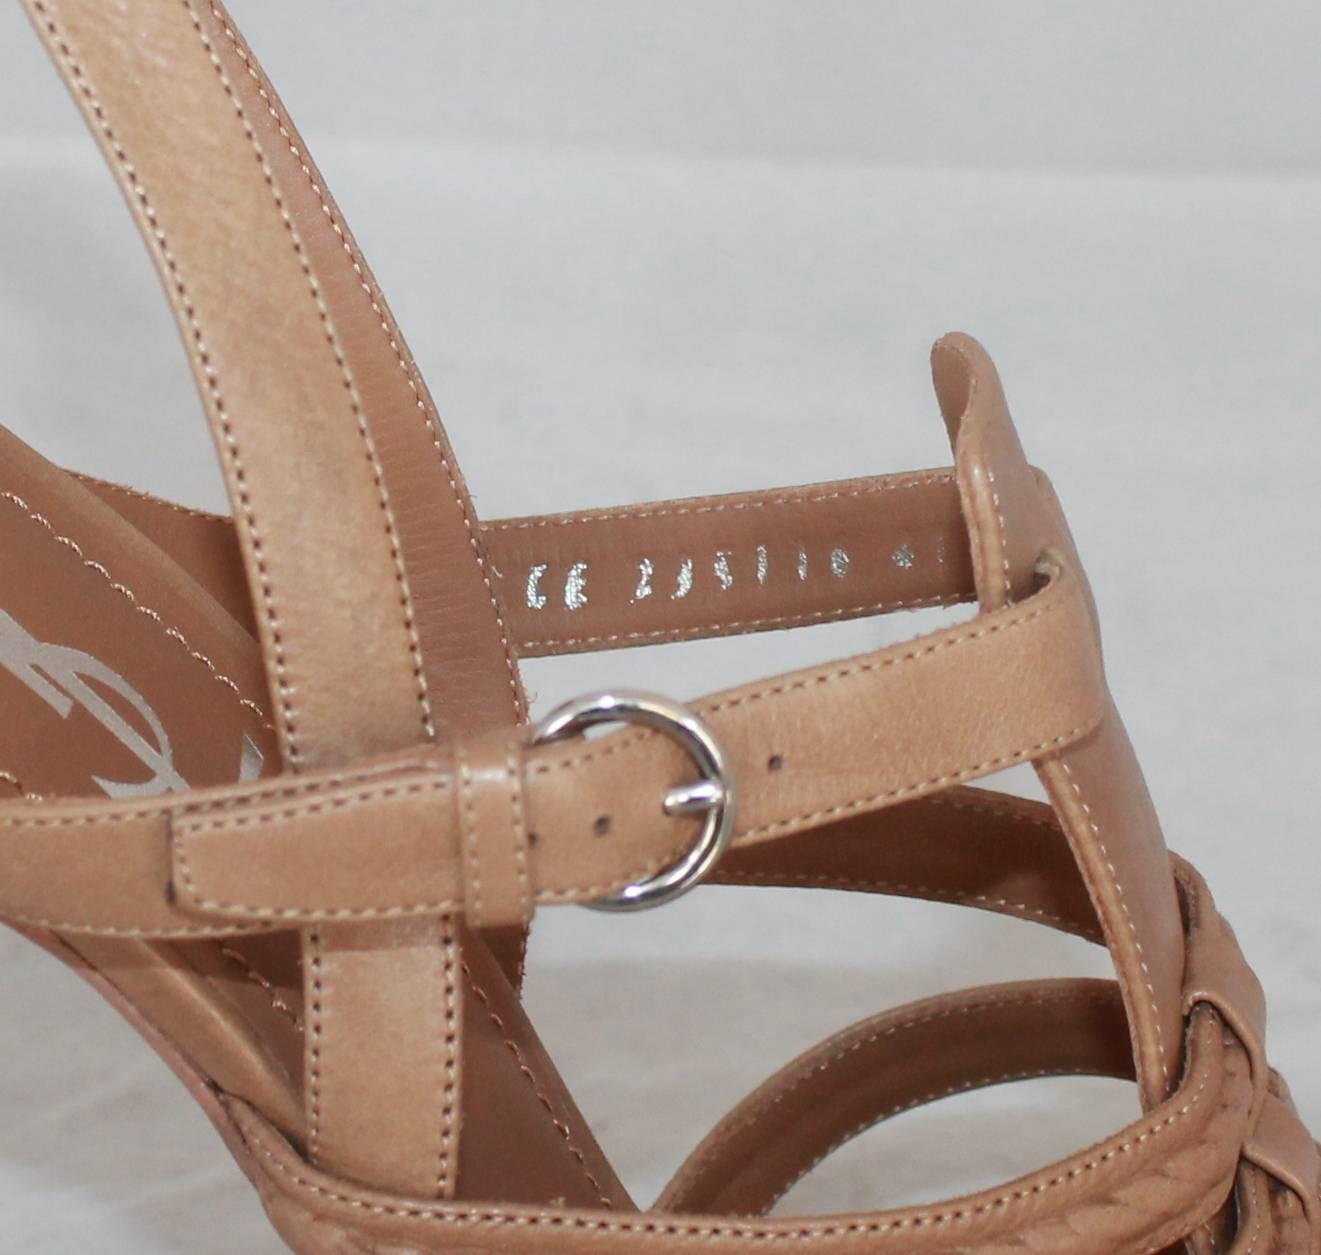 YSL Tan Leather Strappy Platform Heel w/ Slingback Strap - 41 In Good Condition For Sale In West Palm Beach, FL